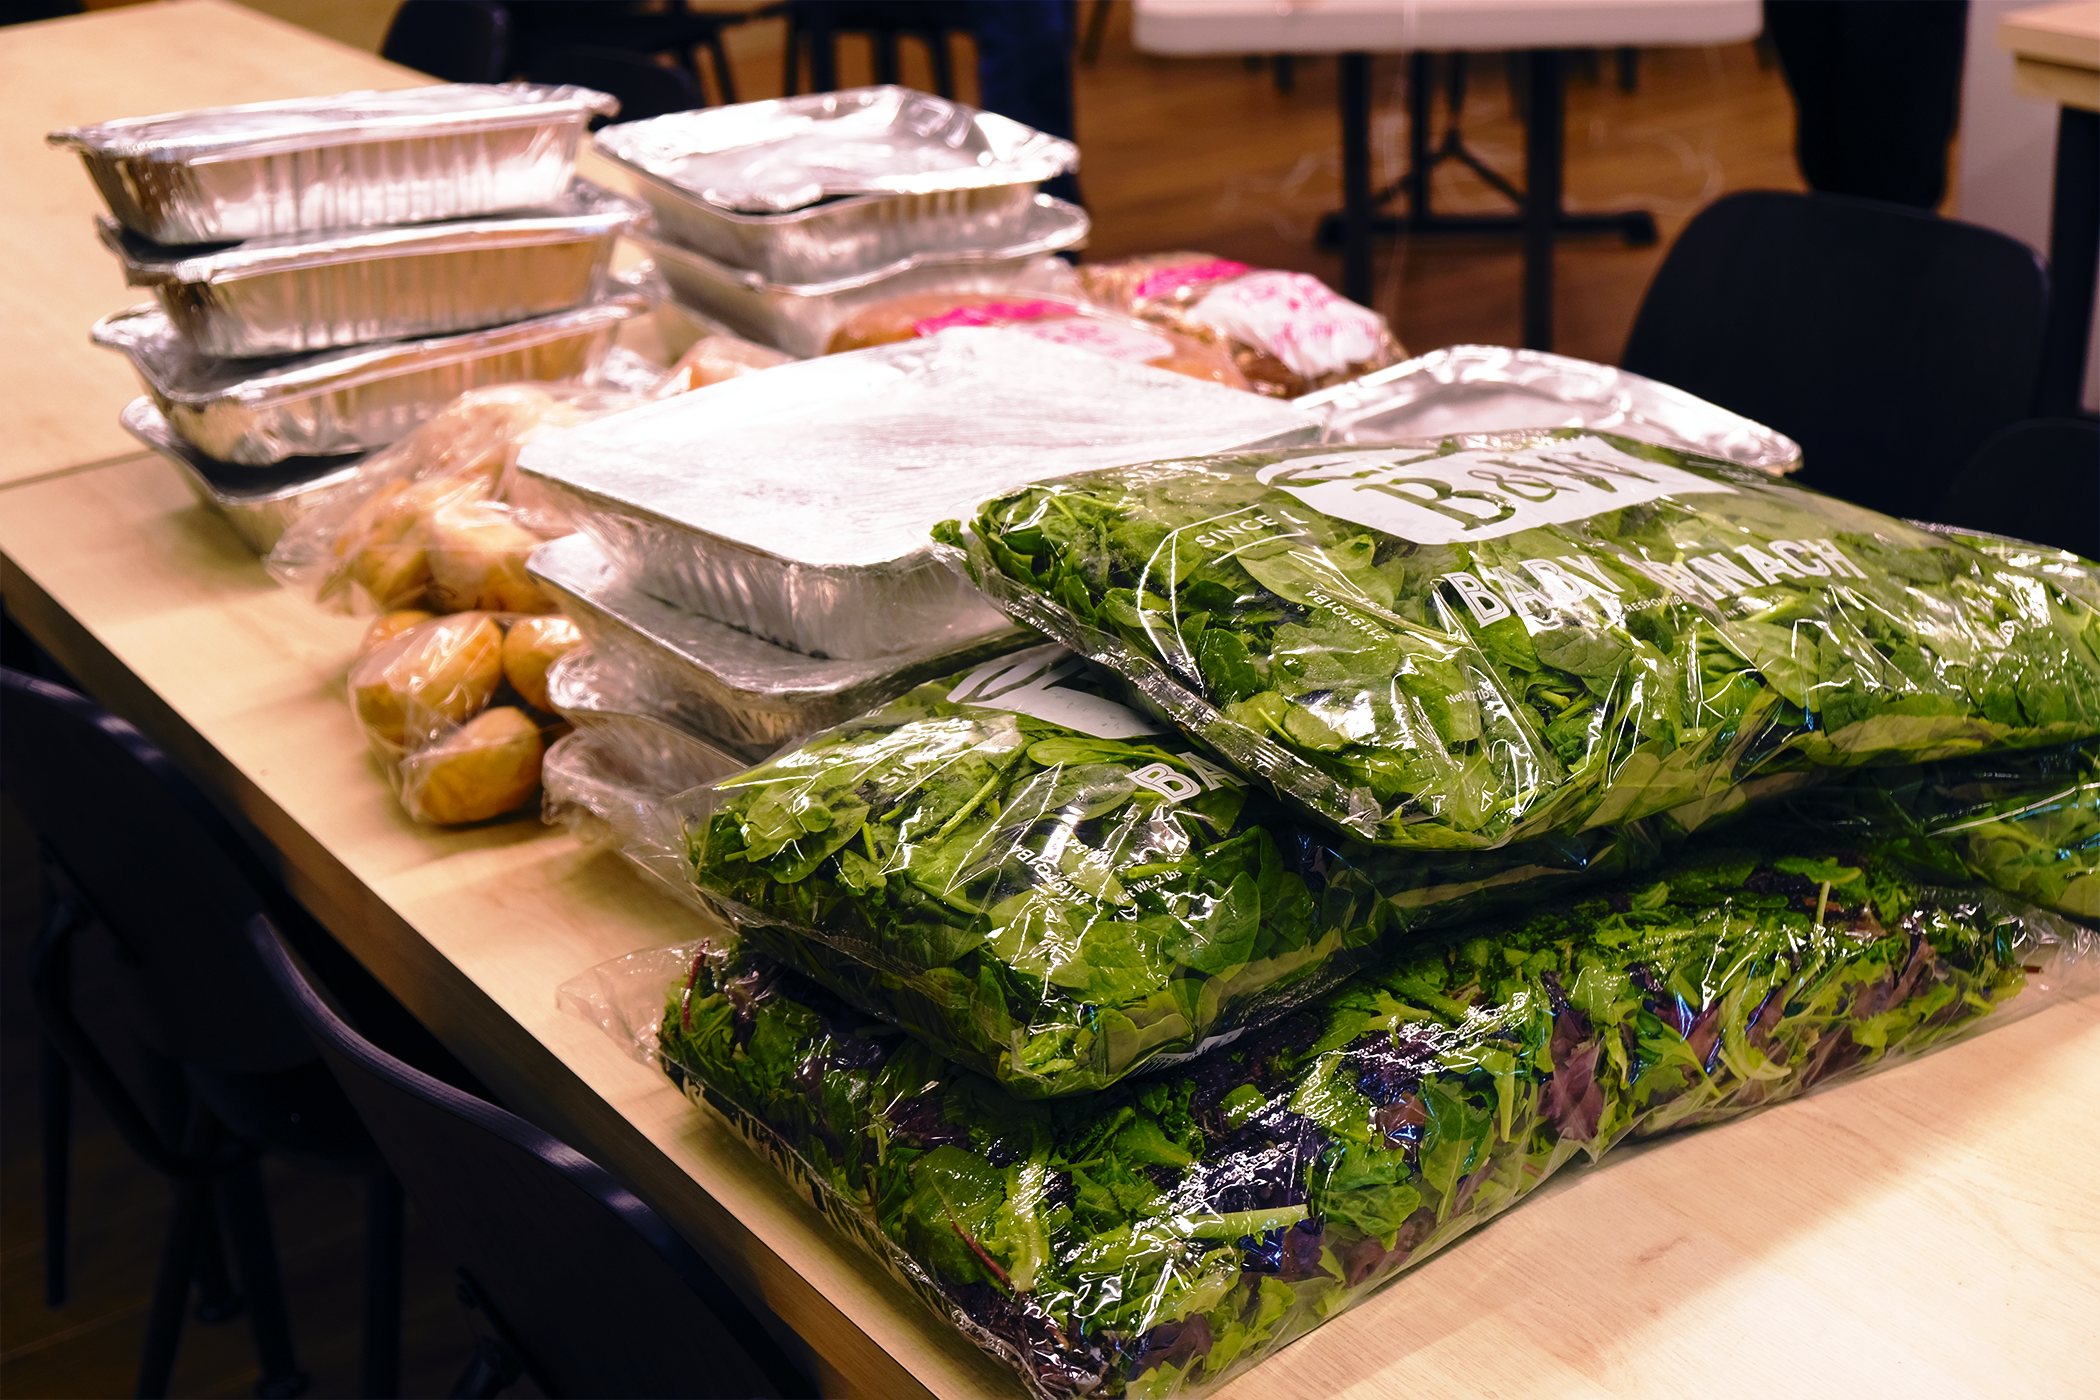 Donated produce and prepared food from an office.